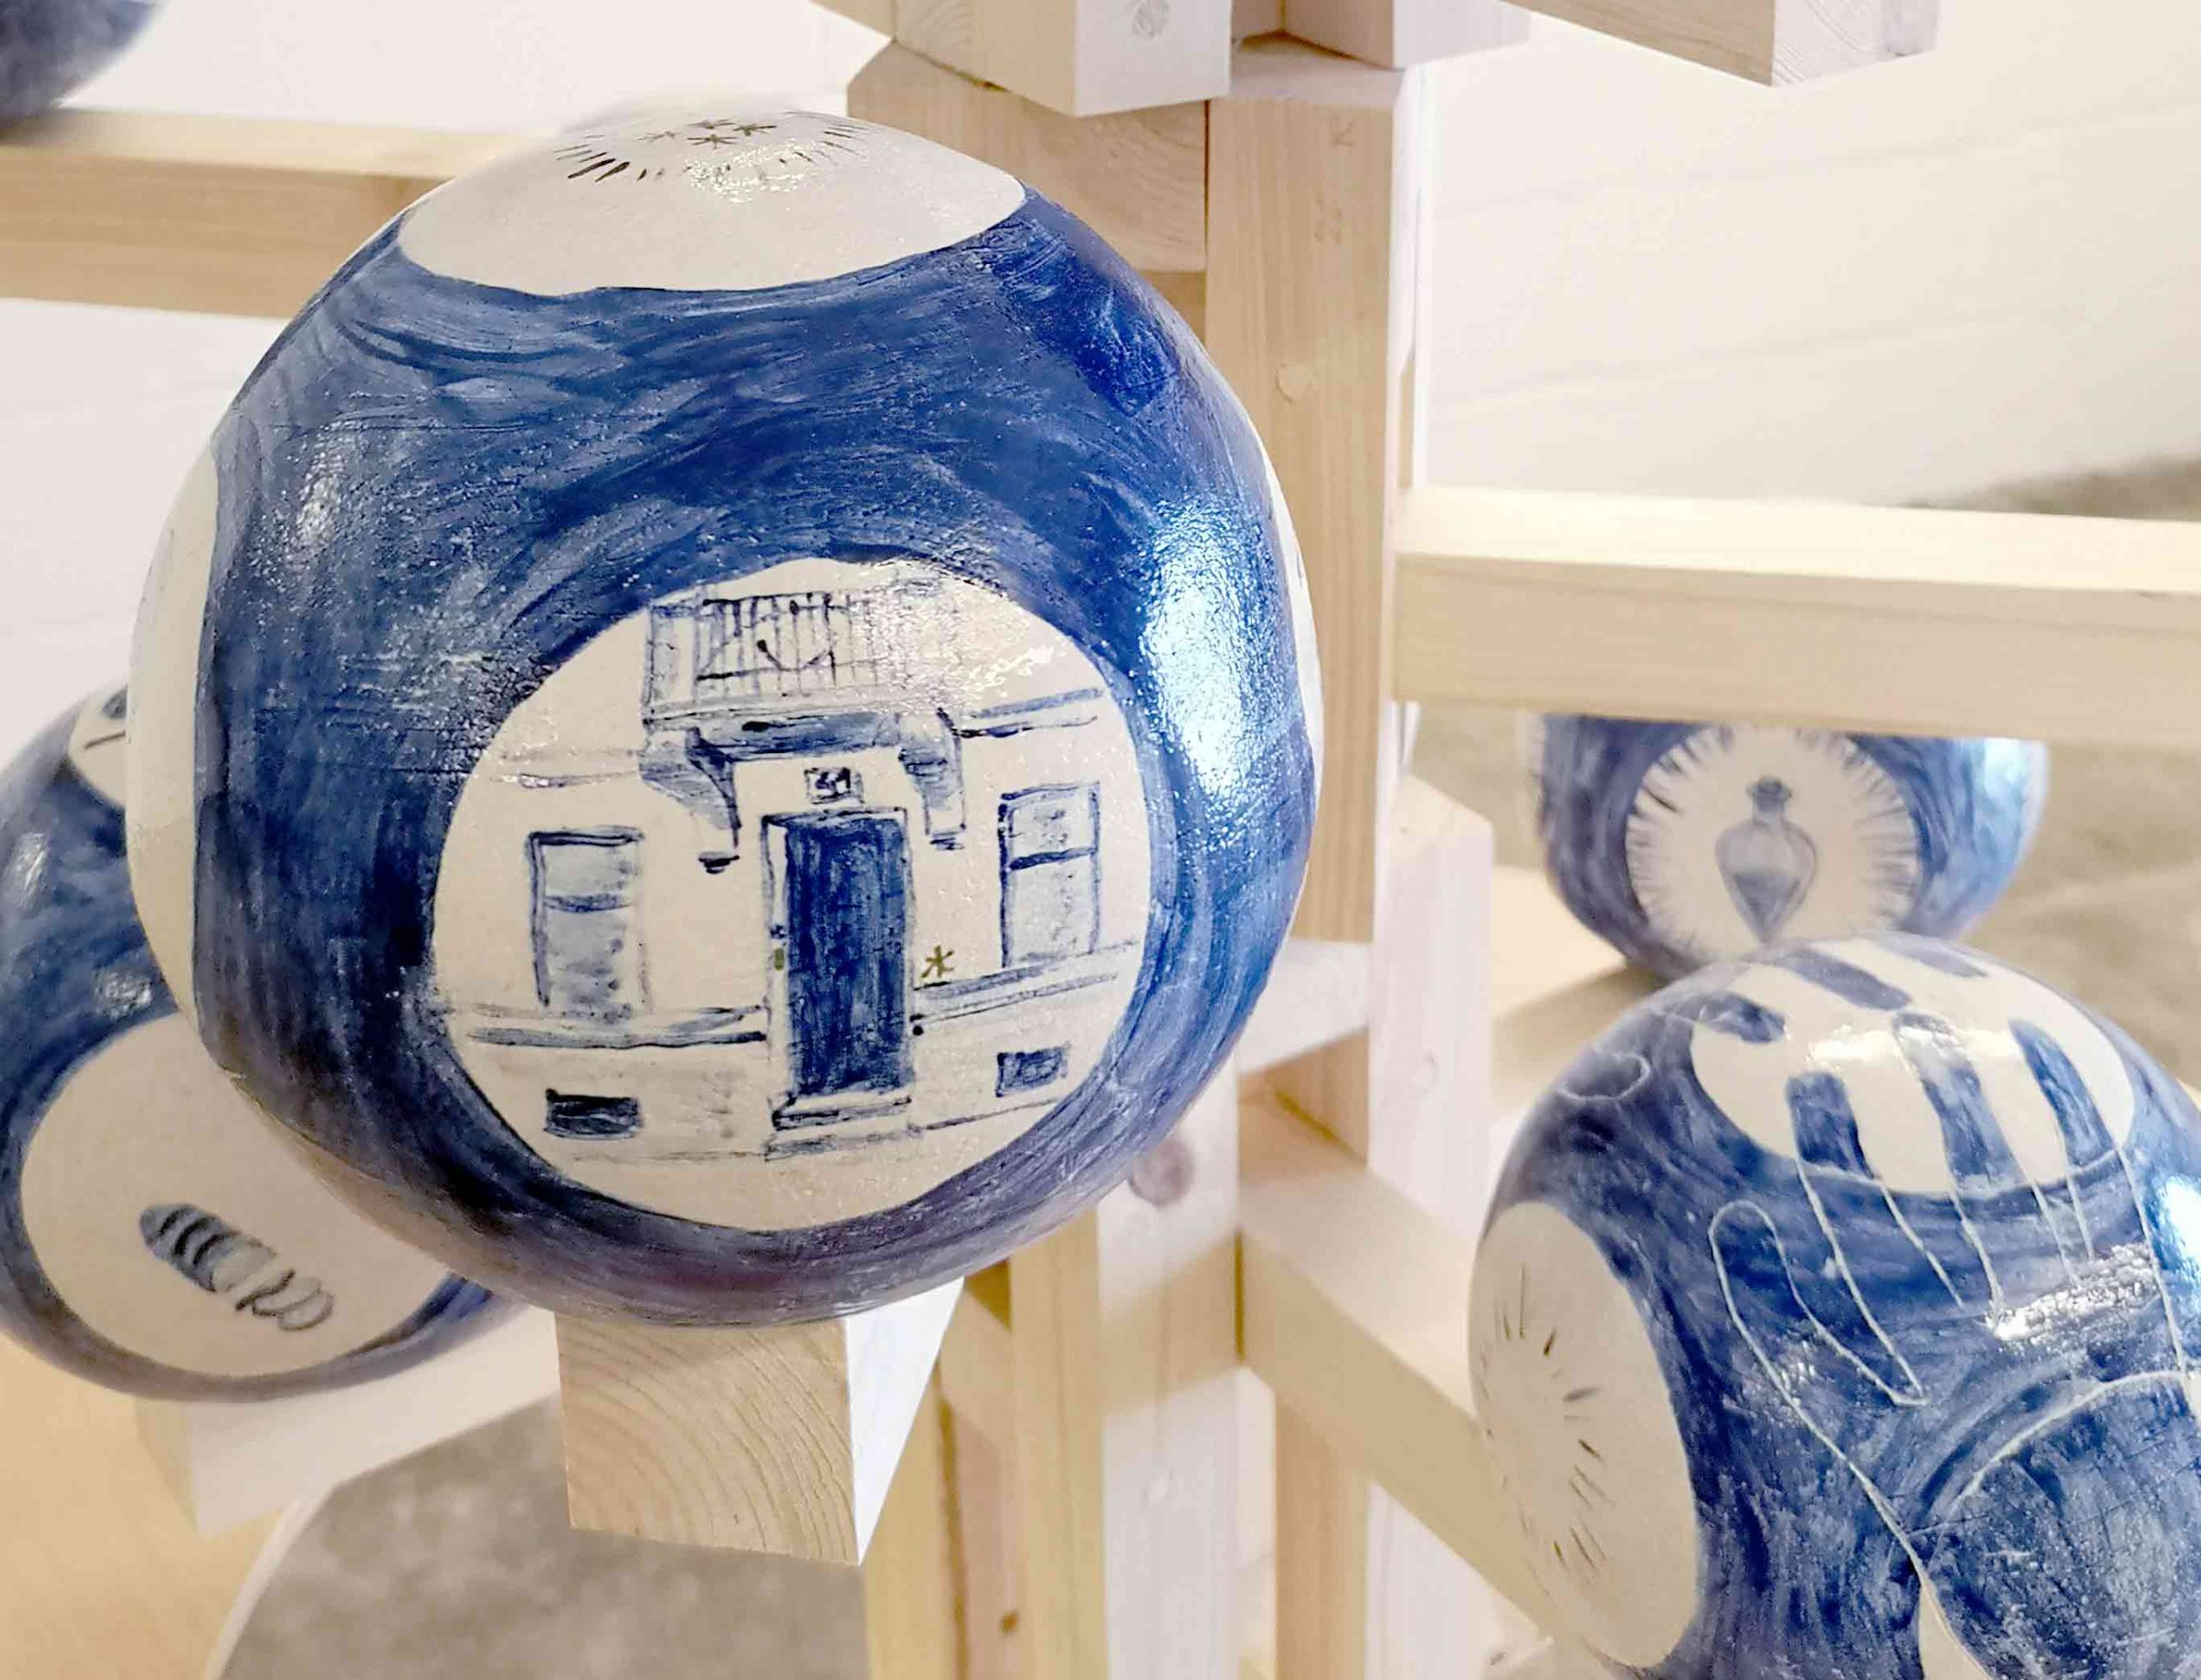 A close up photograph of one of the cermaic spheres in the previous photo, showing the painted surface which has an image of a doorway underneath a iron balcony, painted in blue on a white background. the other spheres are visible at the edge of the frame. 